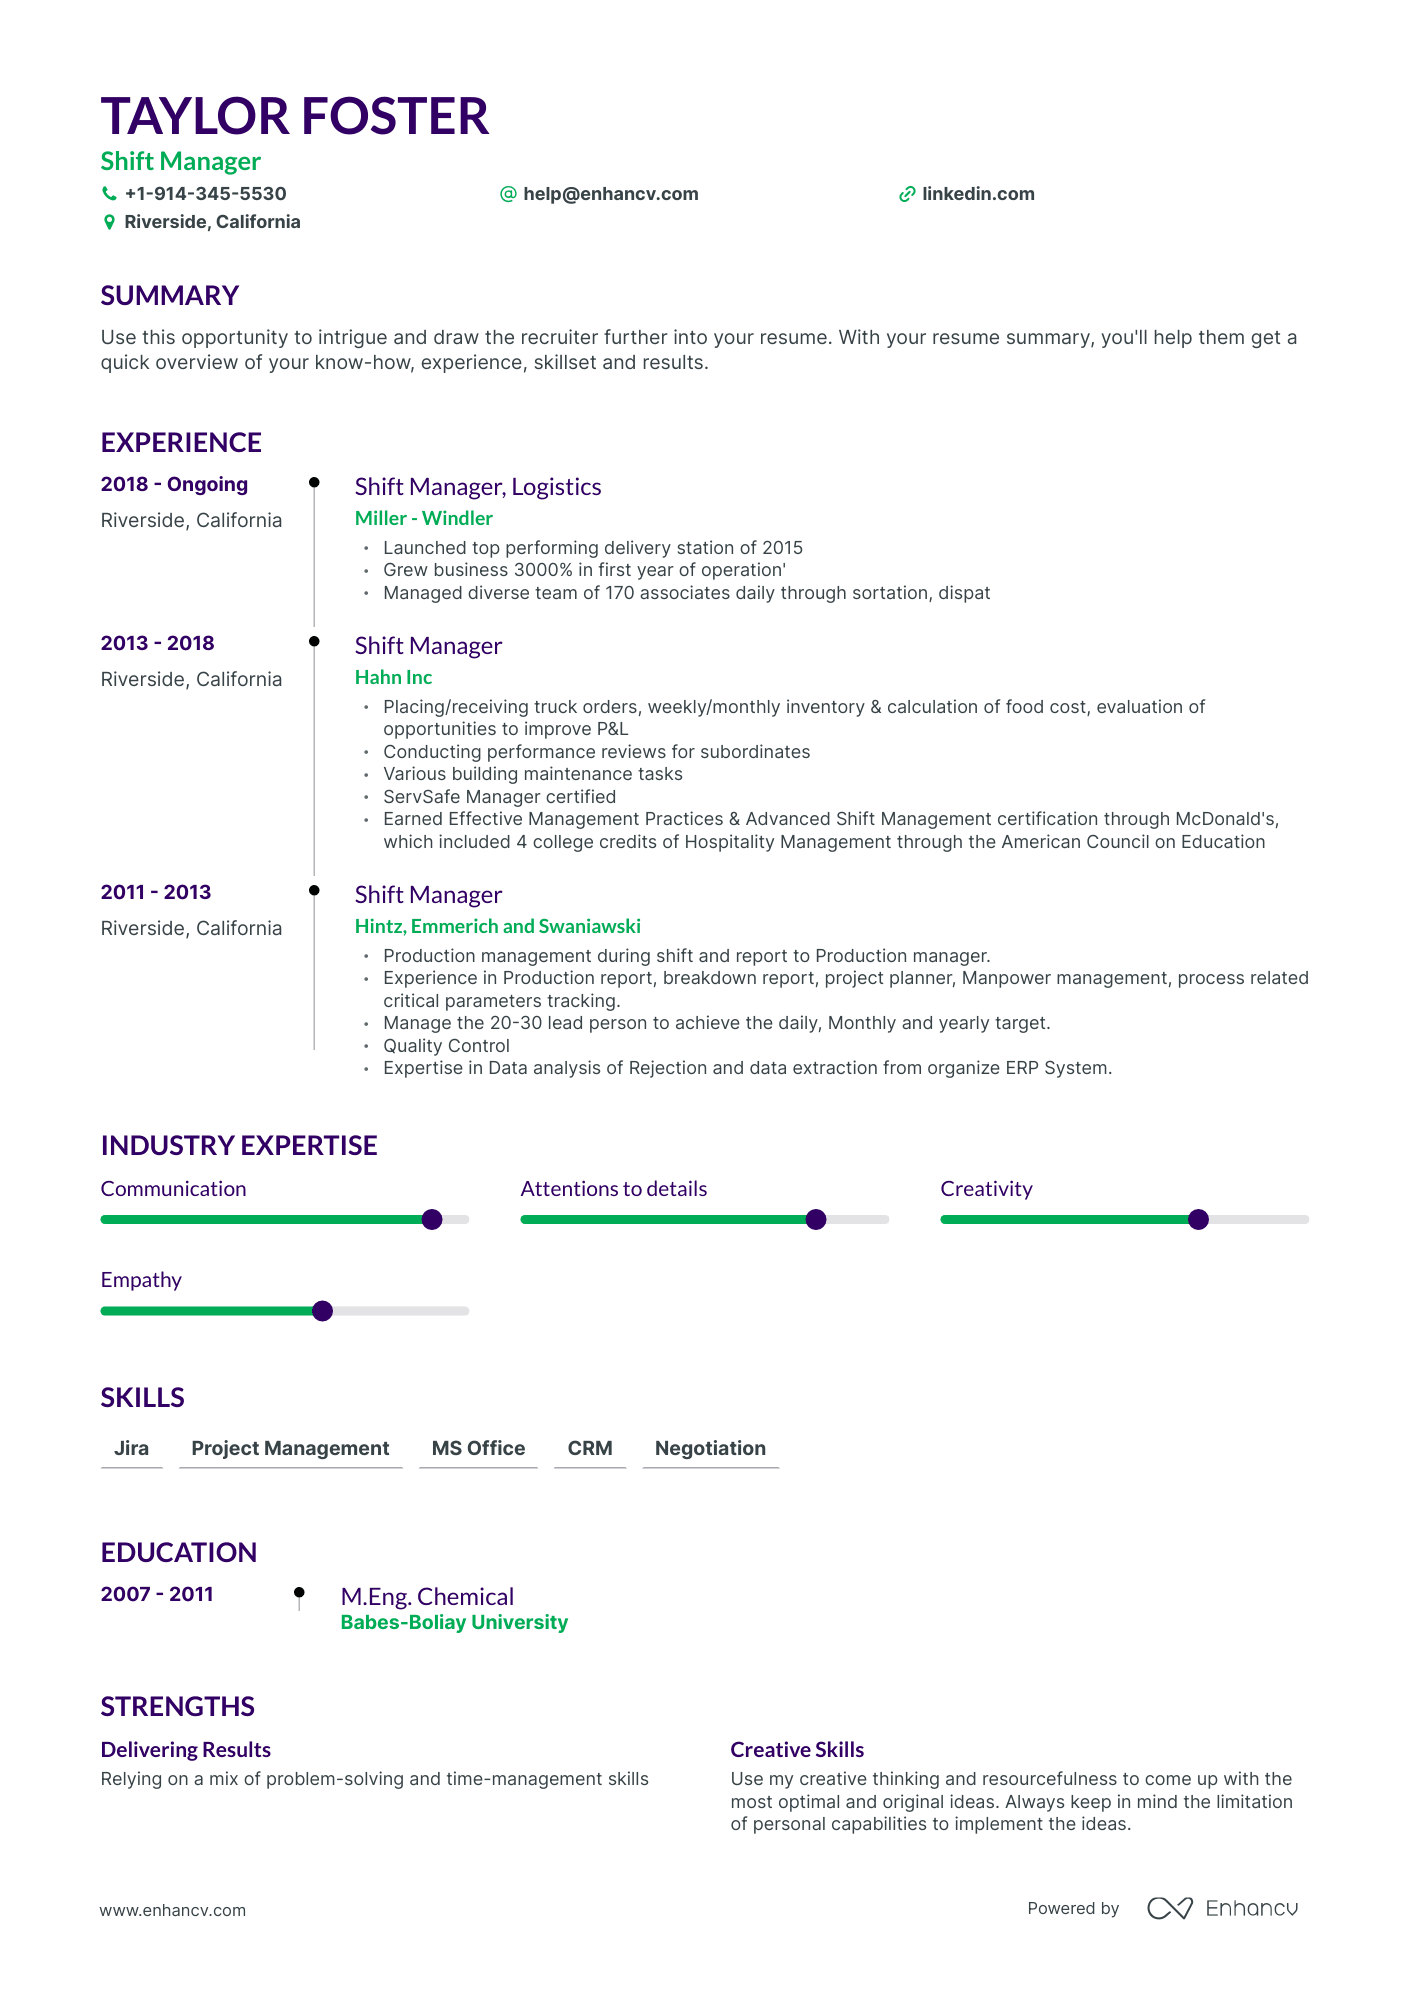 Shift Manager Resume Examples & Guide for 2023 (Layout, Skills ...